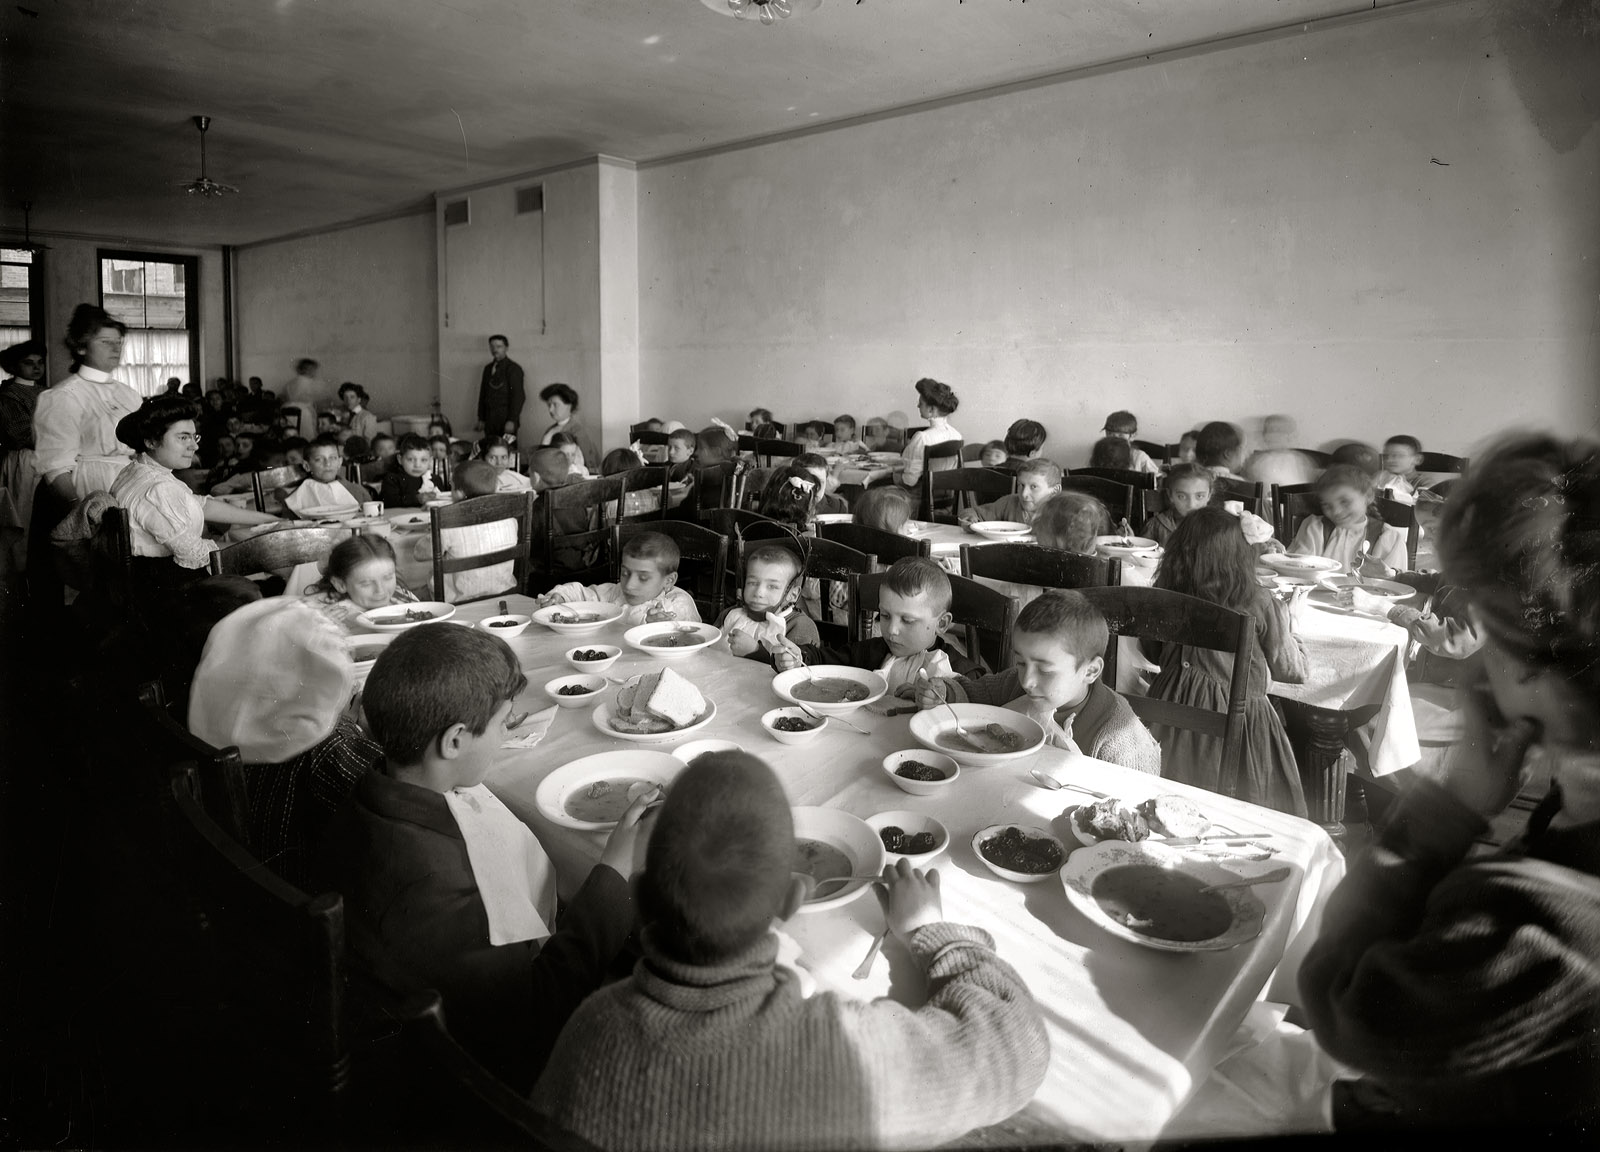 New York City circa 1908. "Luncheon -- Cripple School, Henry Street." Dining room at the East Side Free School for Crippled Children, which we saw earlier today. 8x10 glass negative, George Grantham Bain Collection. View full size.